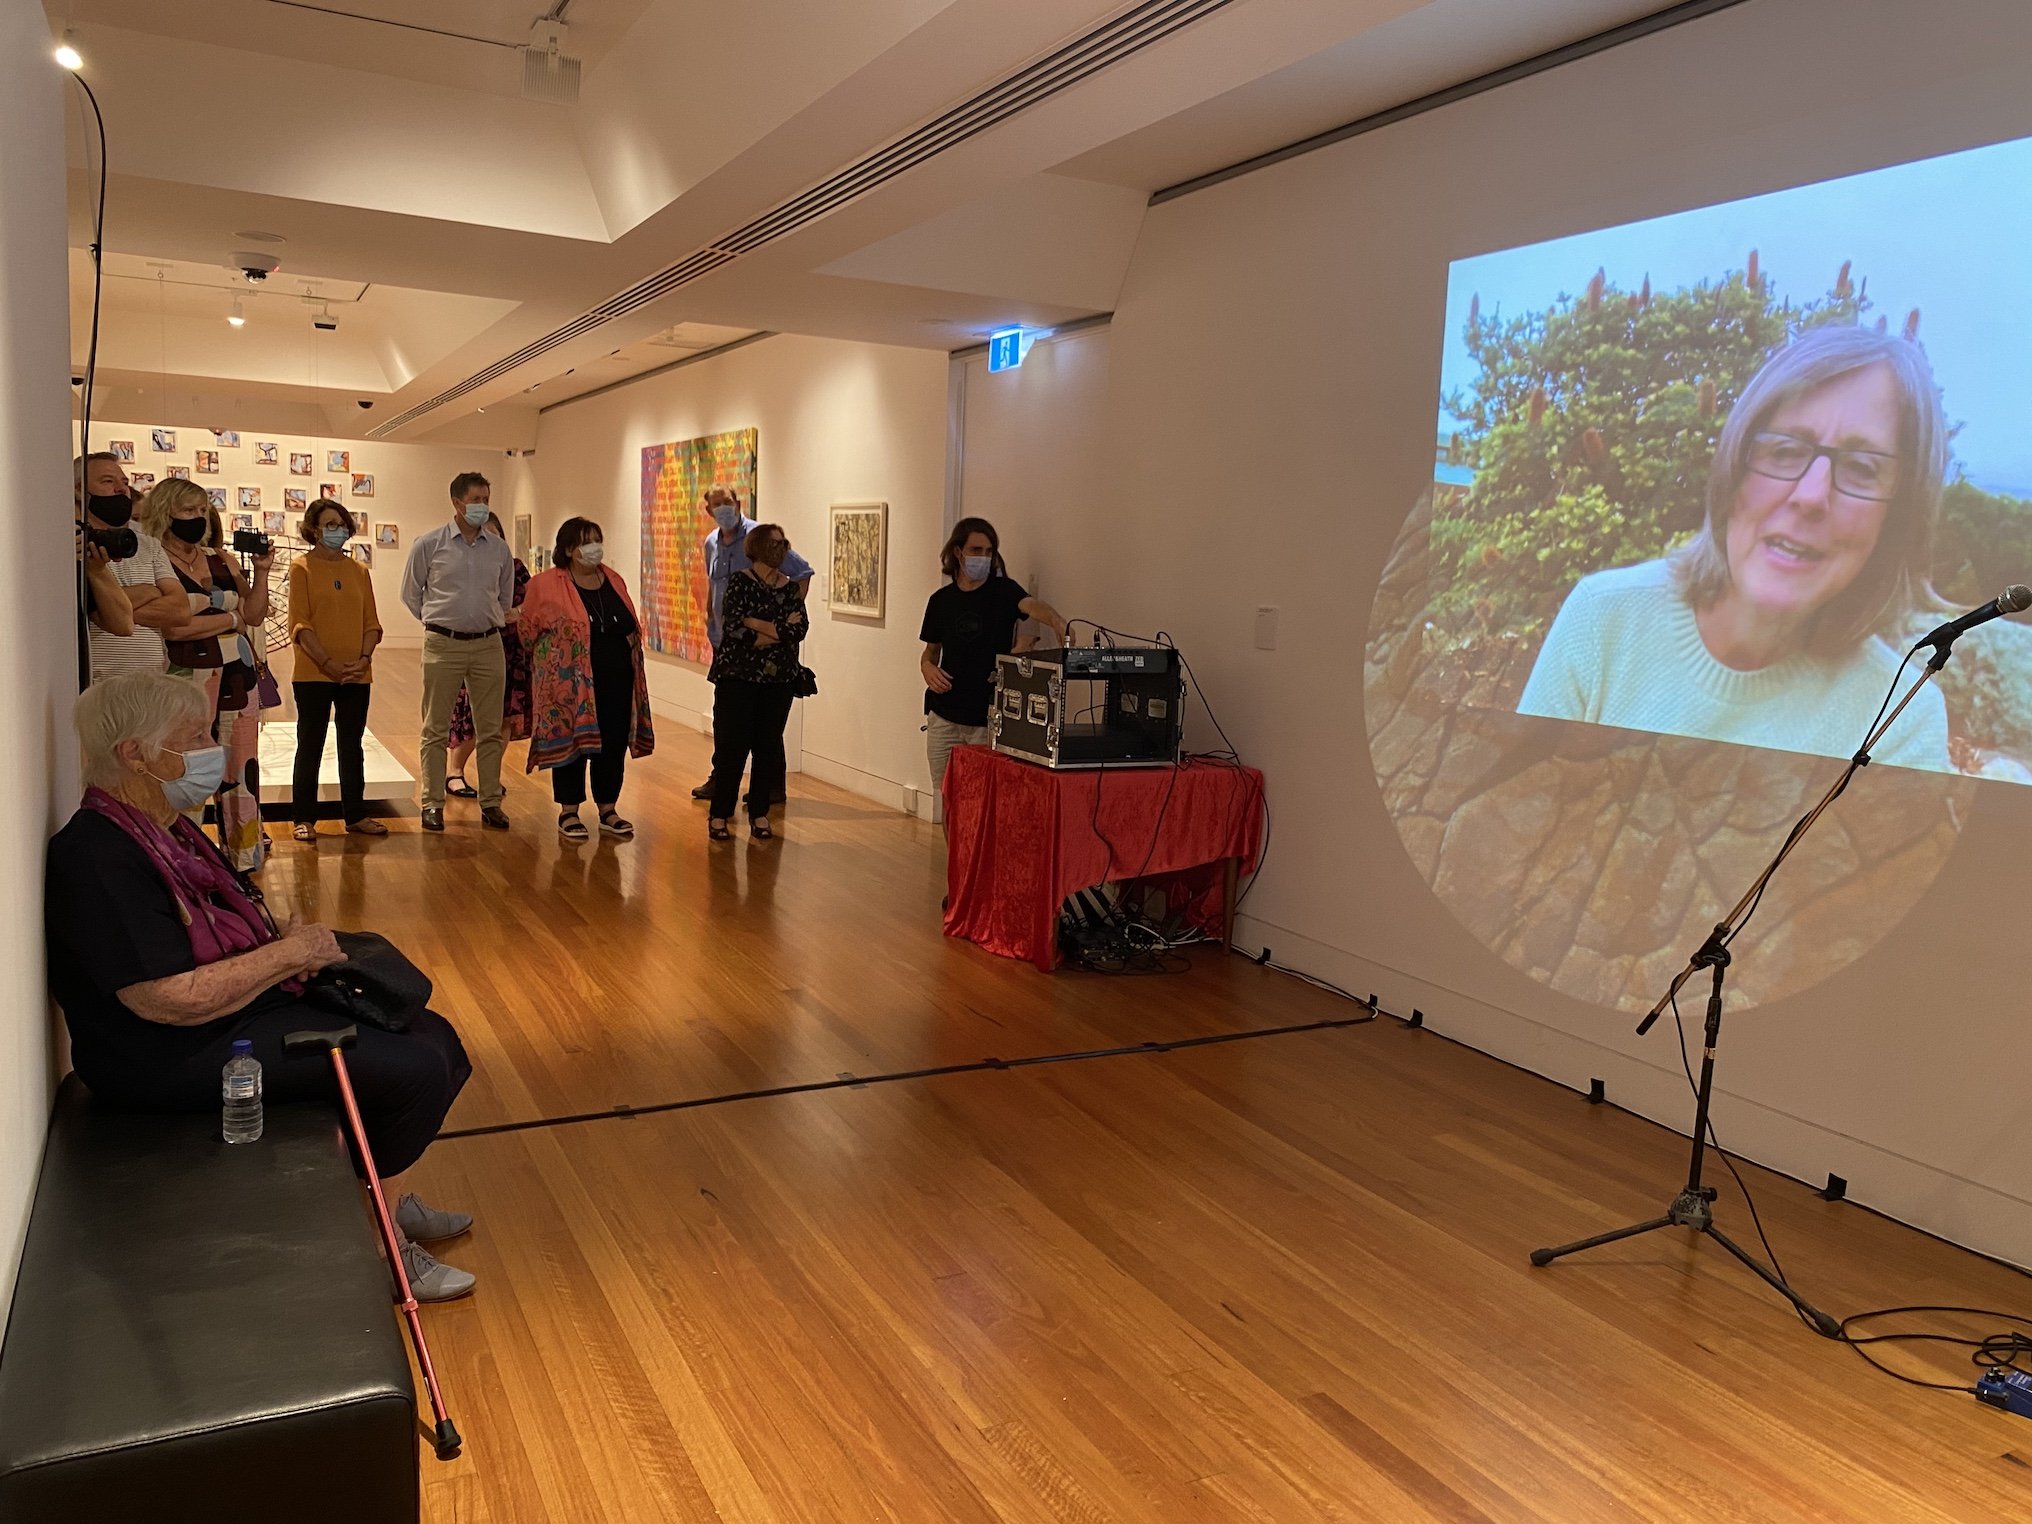  Opening night of the final exhibition of works. At Coffs Harbour Regional Gallery. Pre-recording of poetry reading by Chris Armstrong. 